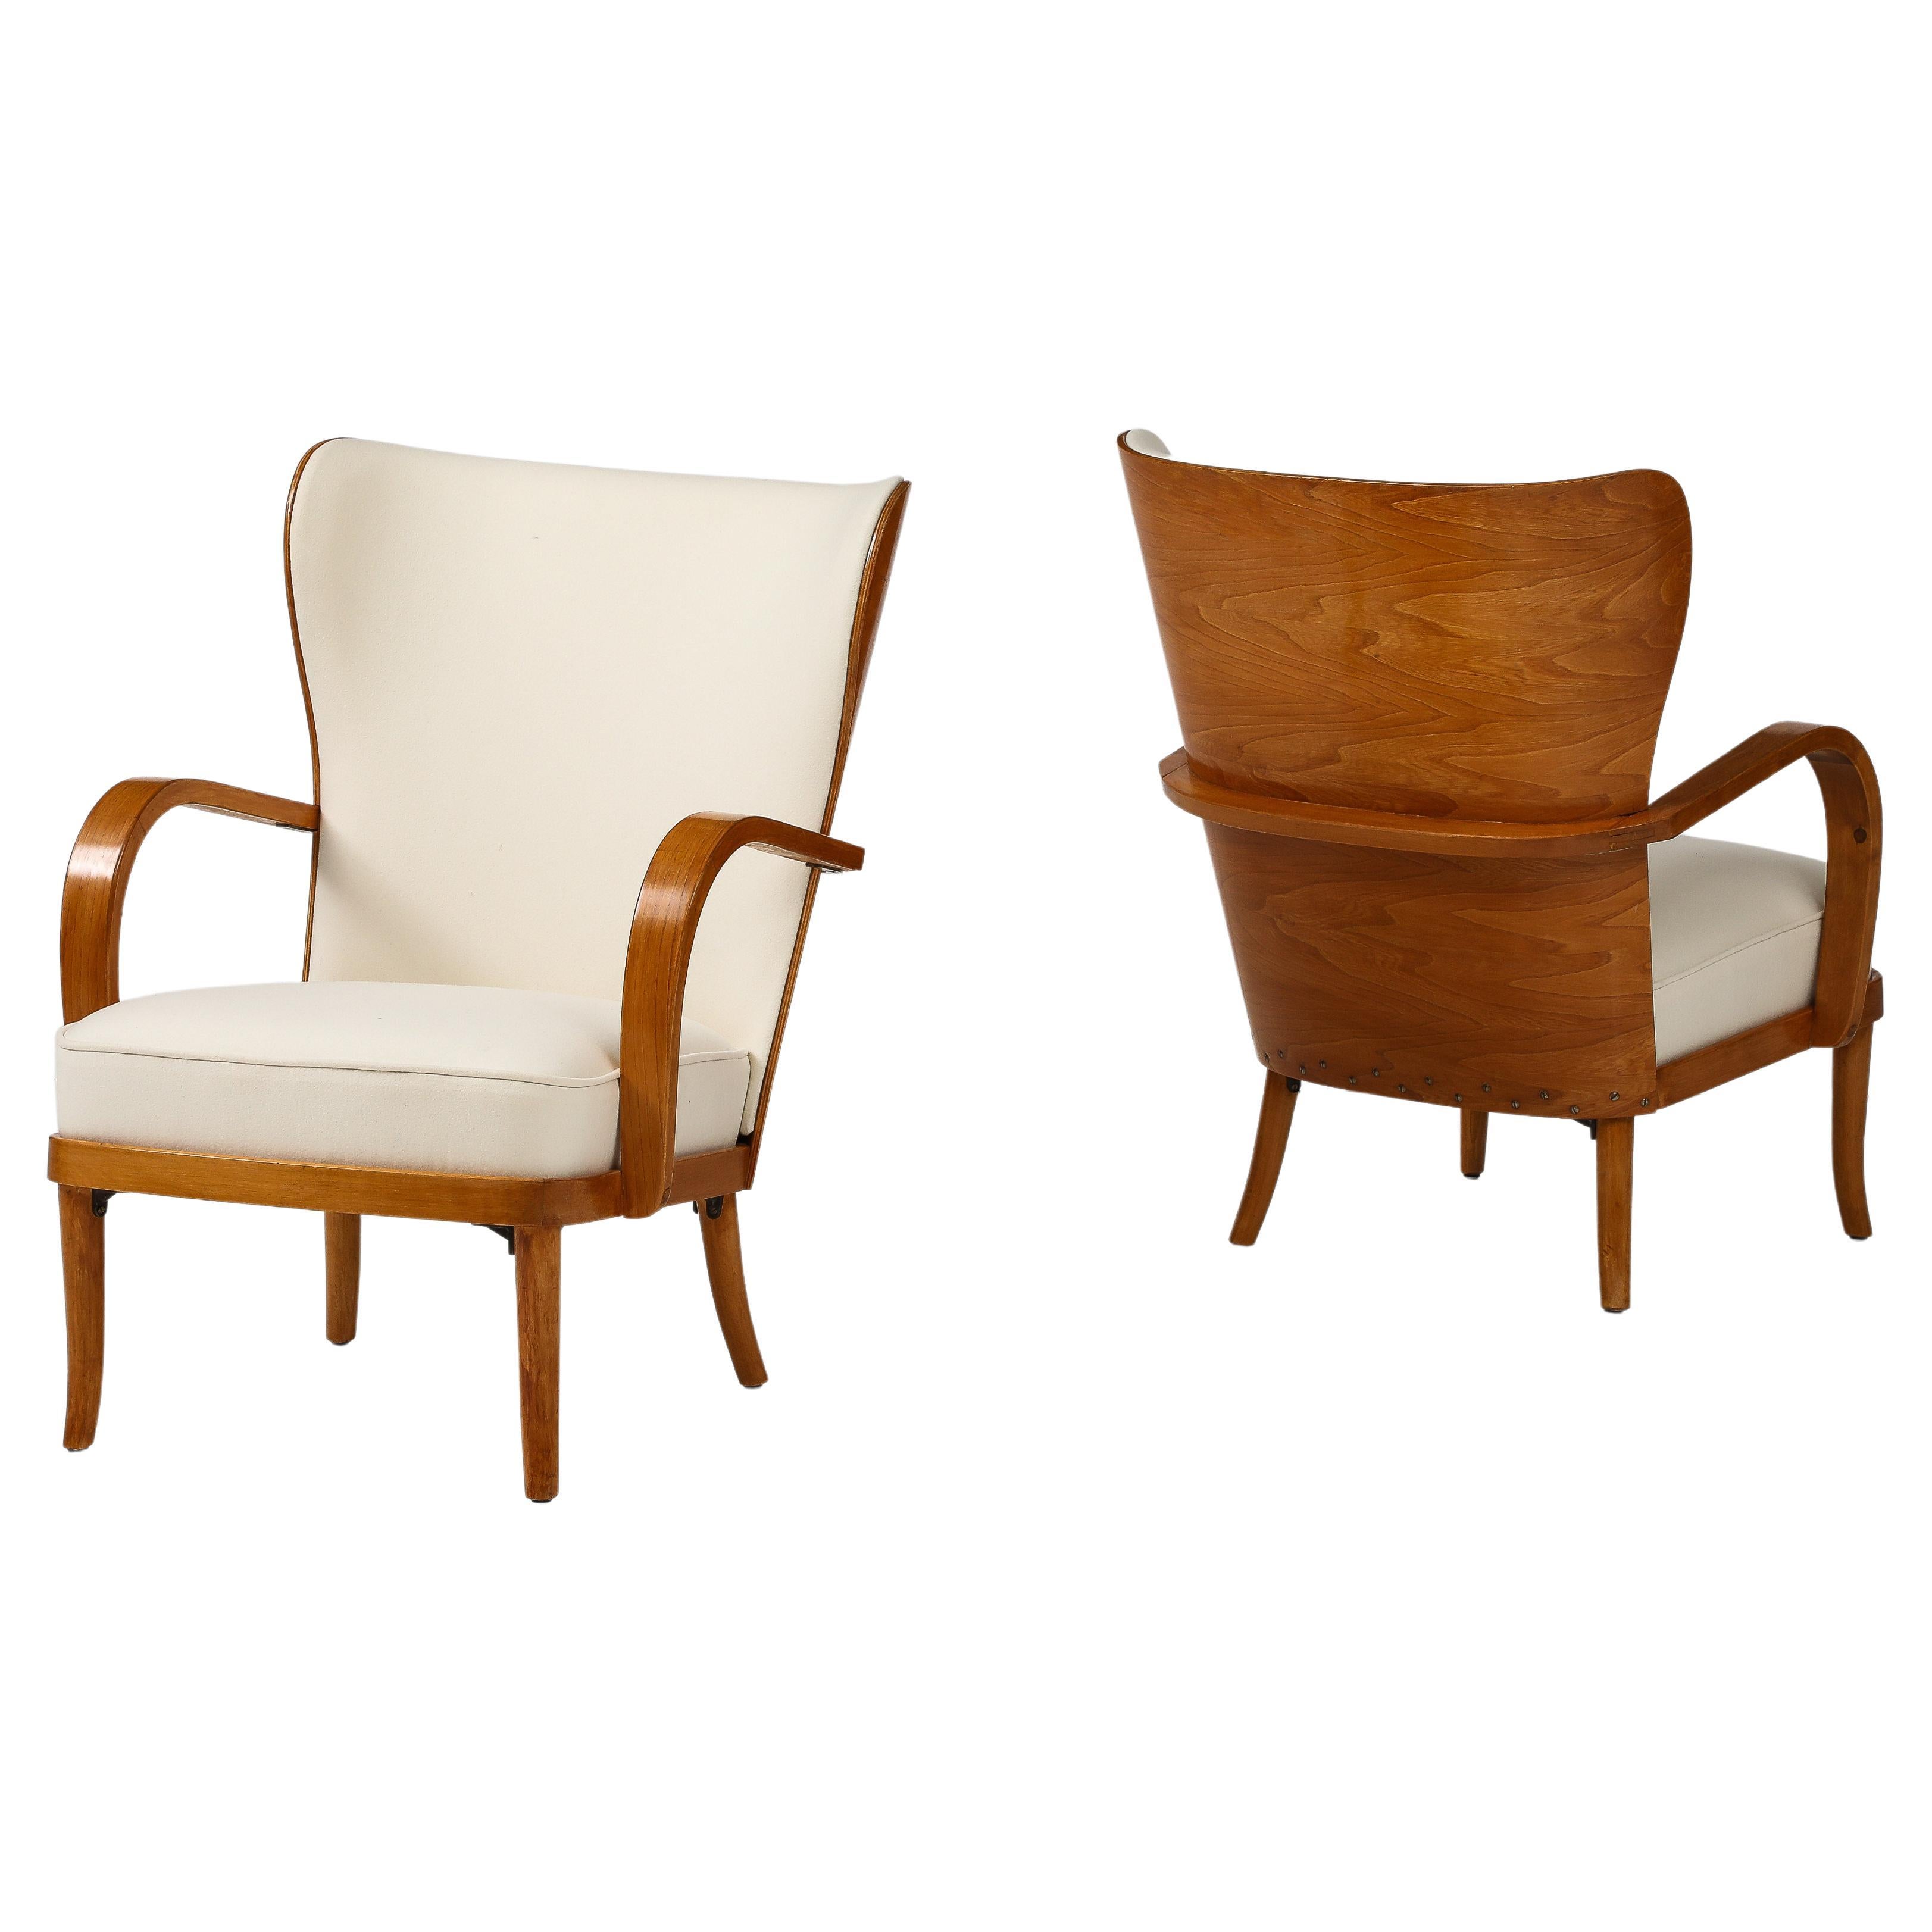 A pair of Finnish elmwood high back open-armchairs designed by Werner West, Circa 1930-40. Produced by Wilhelm Schaumannin, Vaneritehdas Oy, Jyväskylä, Finland. The high curved back with a form elmwood back, rolled arrested continuing behind the